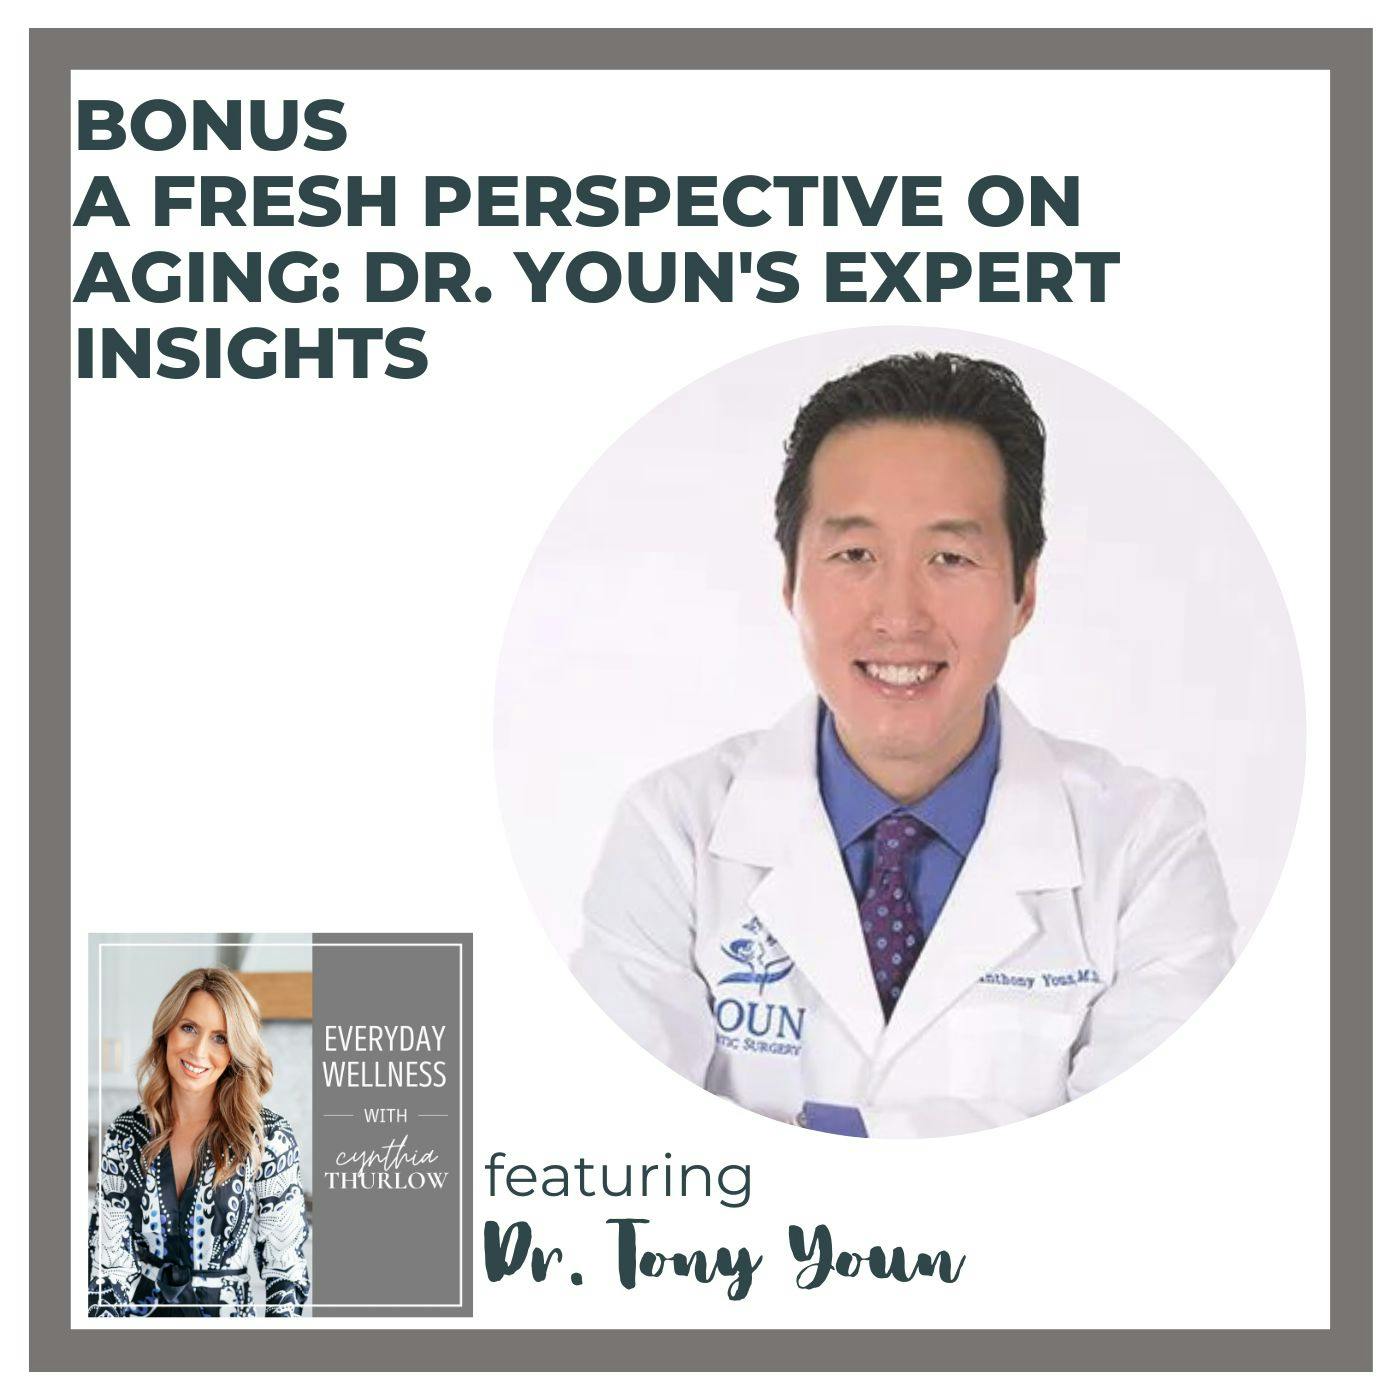 BONUS A Fresh Perspective on Aging: Dr. Youn's Expert Insights  with Dr. Tony Youn